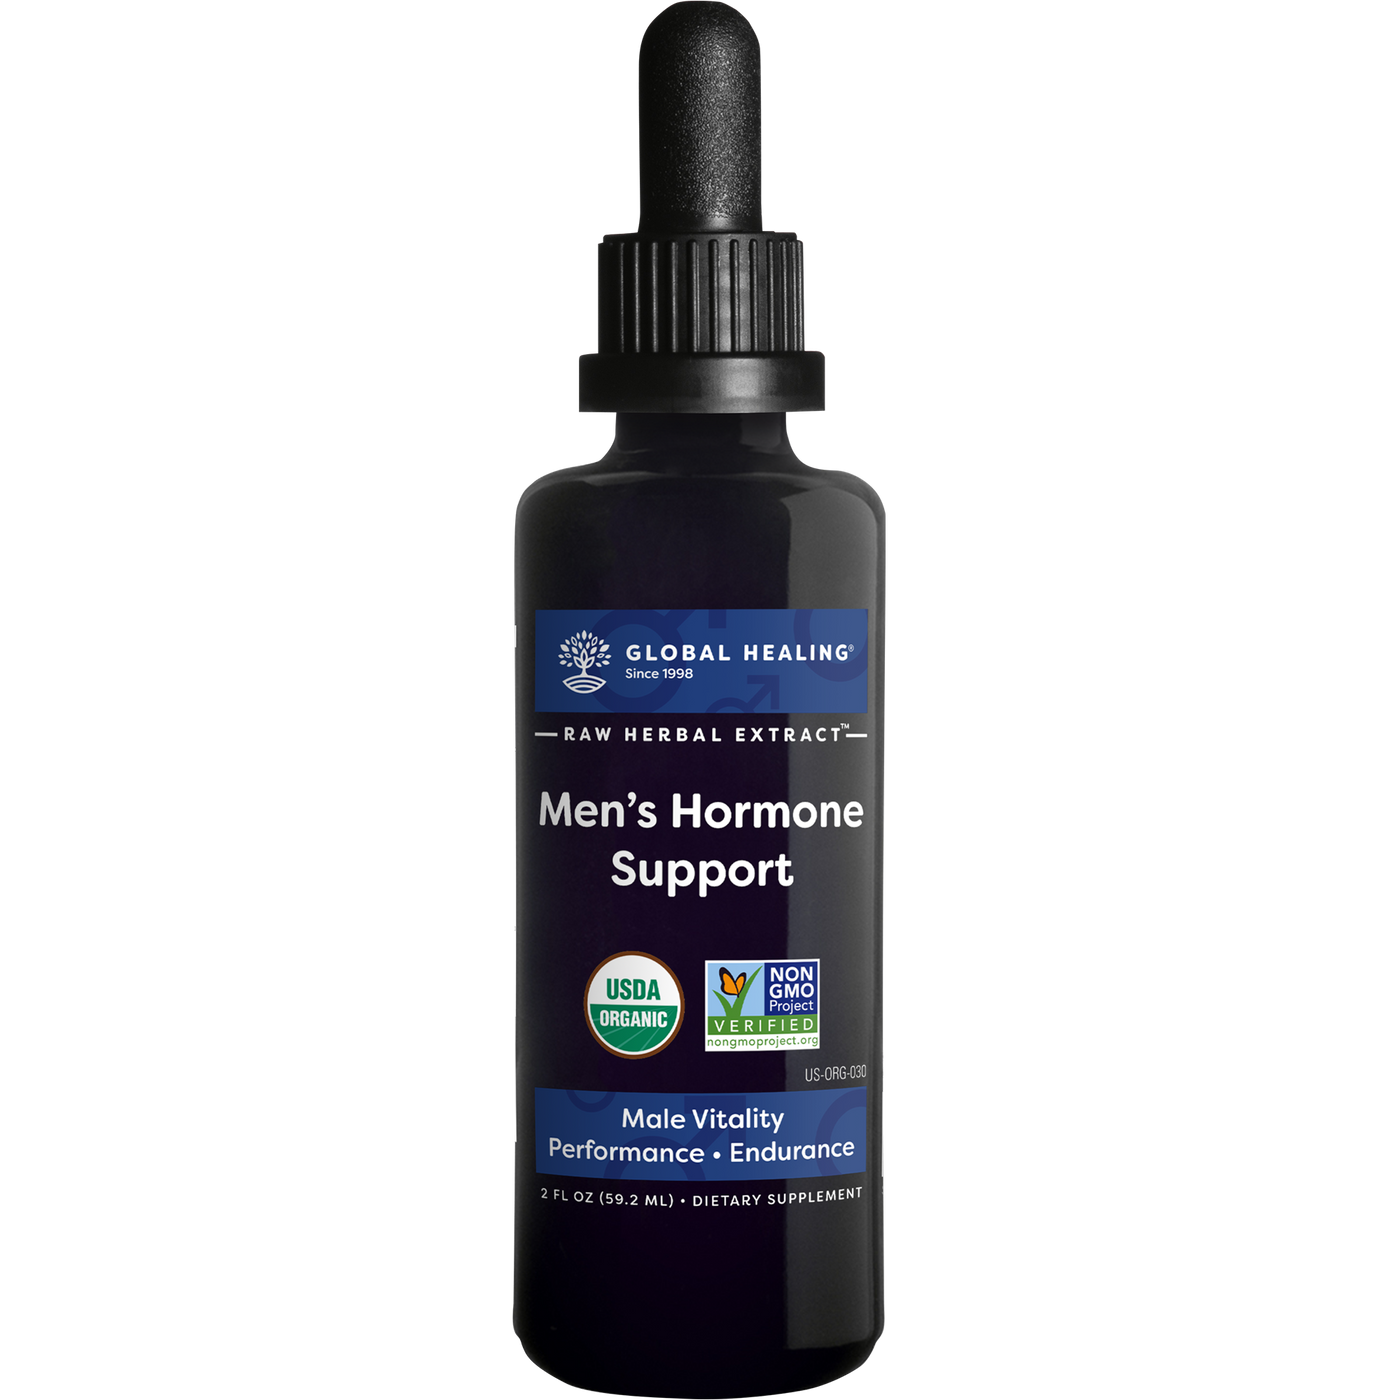 Men's Hormone support 2 fl oz Curated Wellness